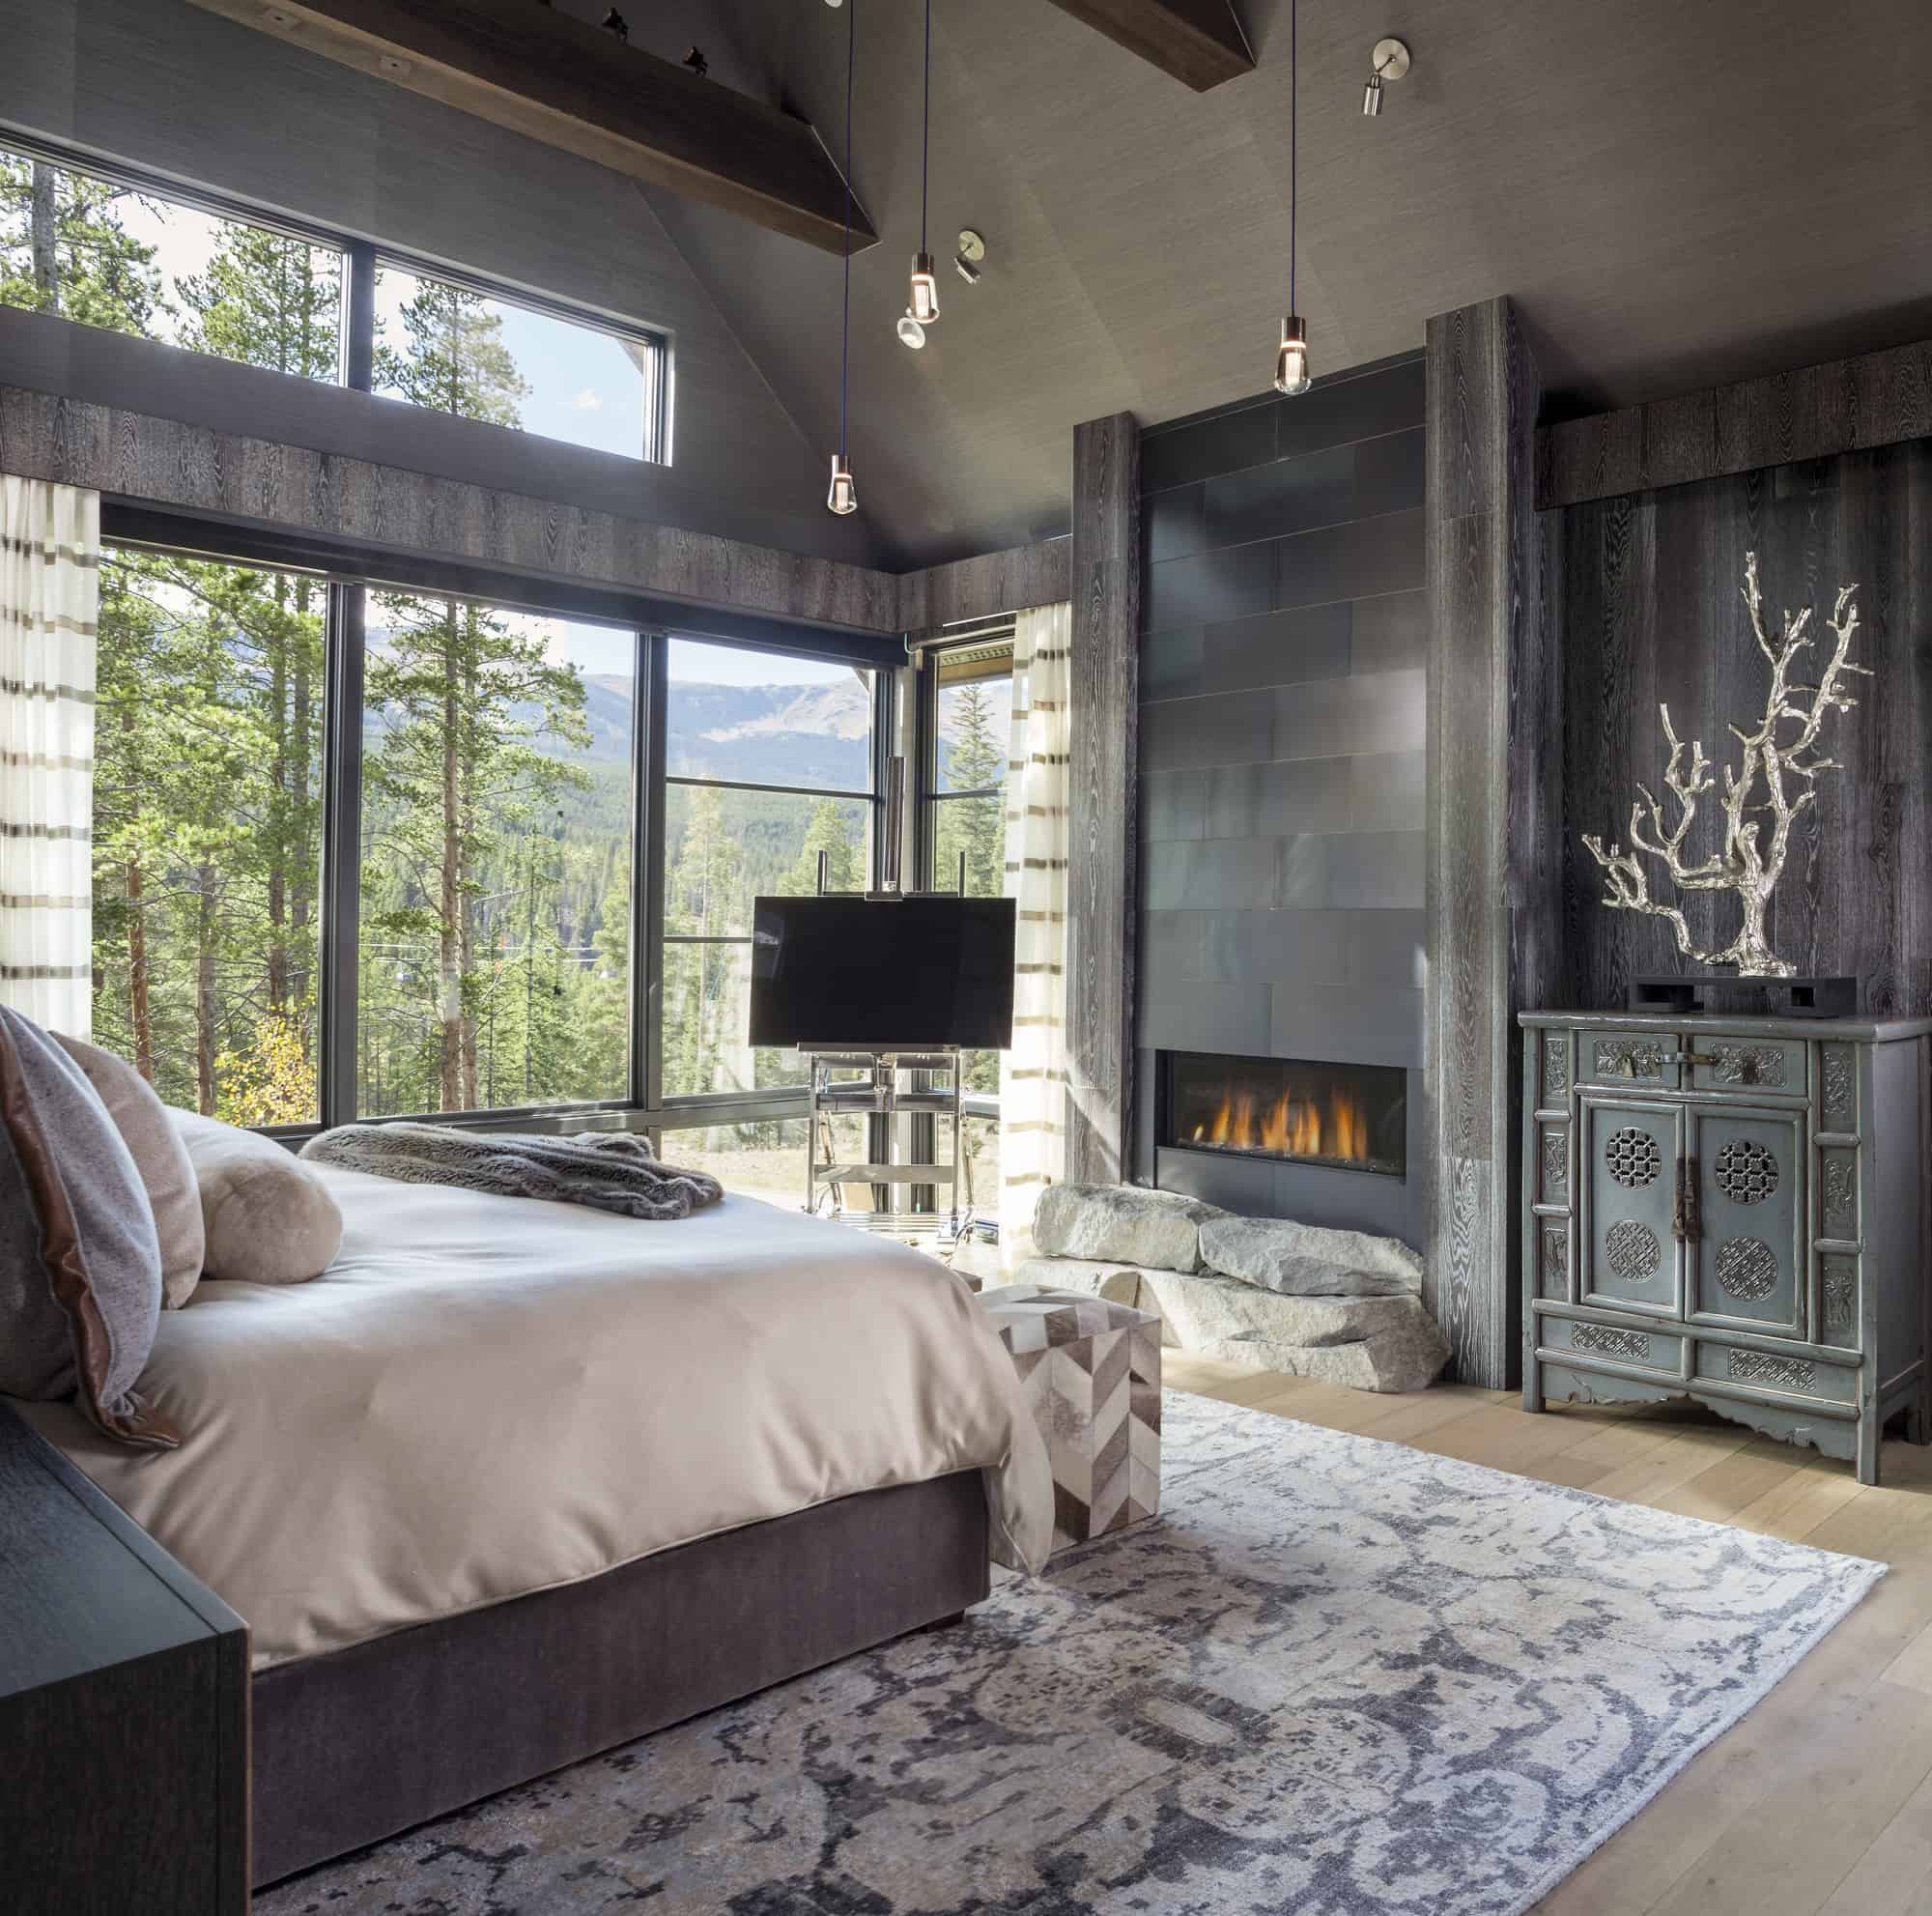 Gorgeous fireplace in master bedroom